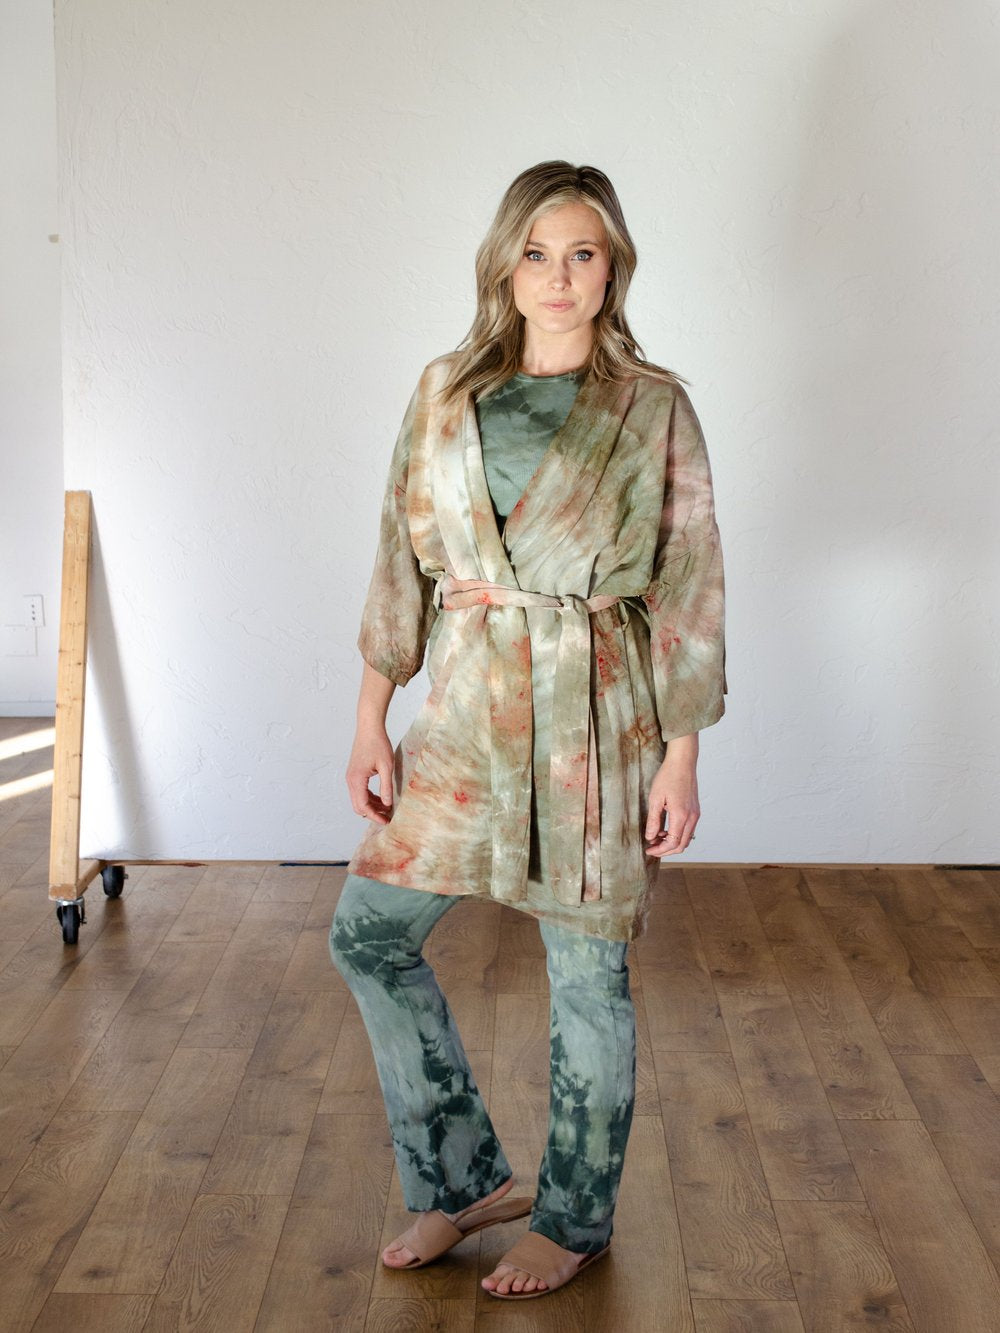 The Luxurious Robe in High Desert Colors - Tie Dye Rayon Robe by 1 Life